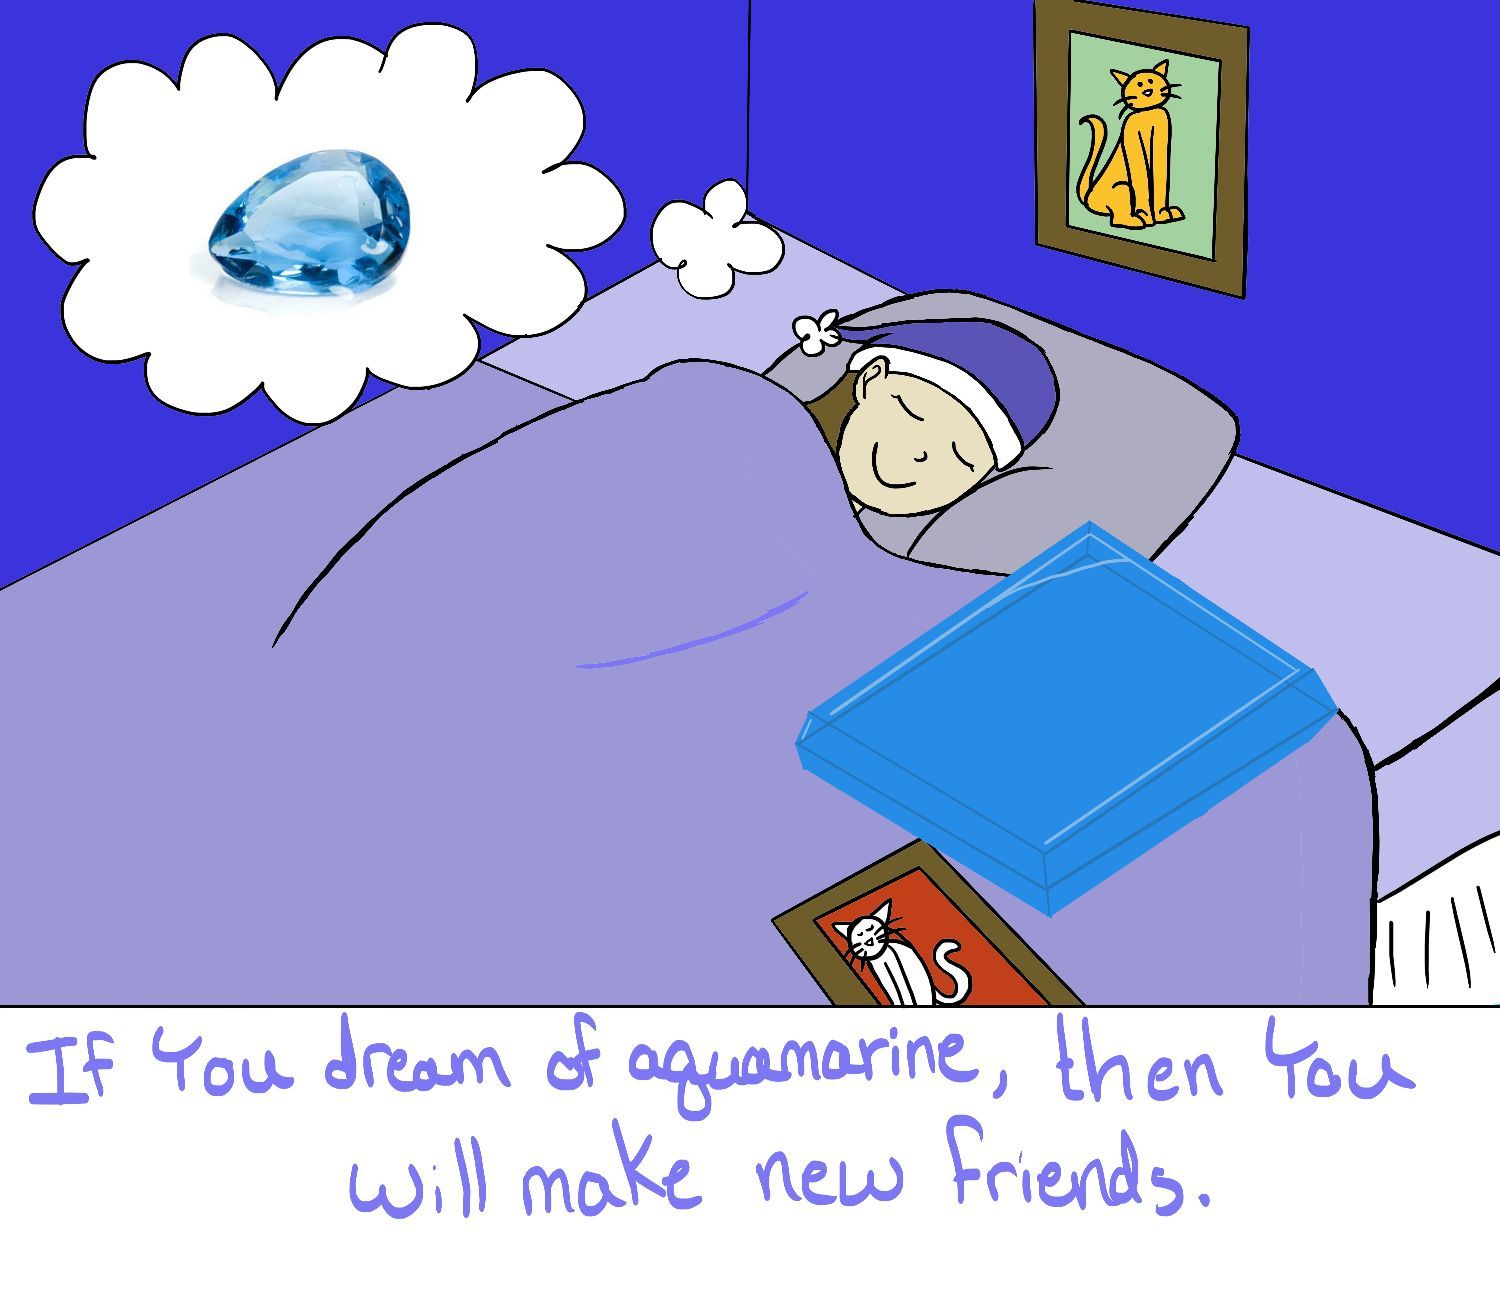 Comic of girl sleeping next to a large blue gem and dreaming of the gem.